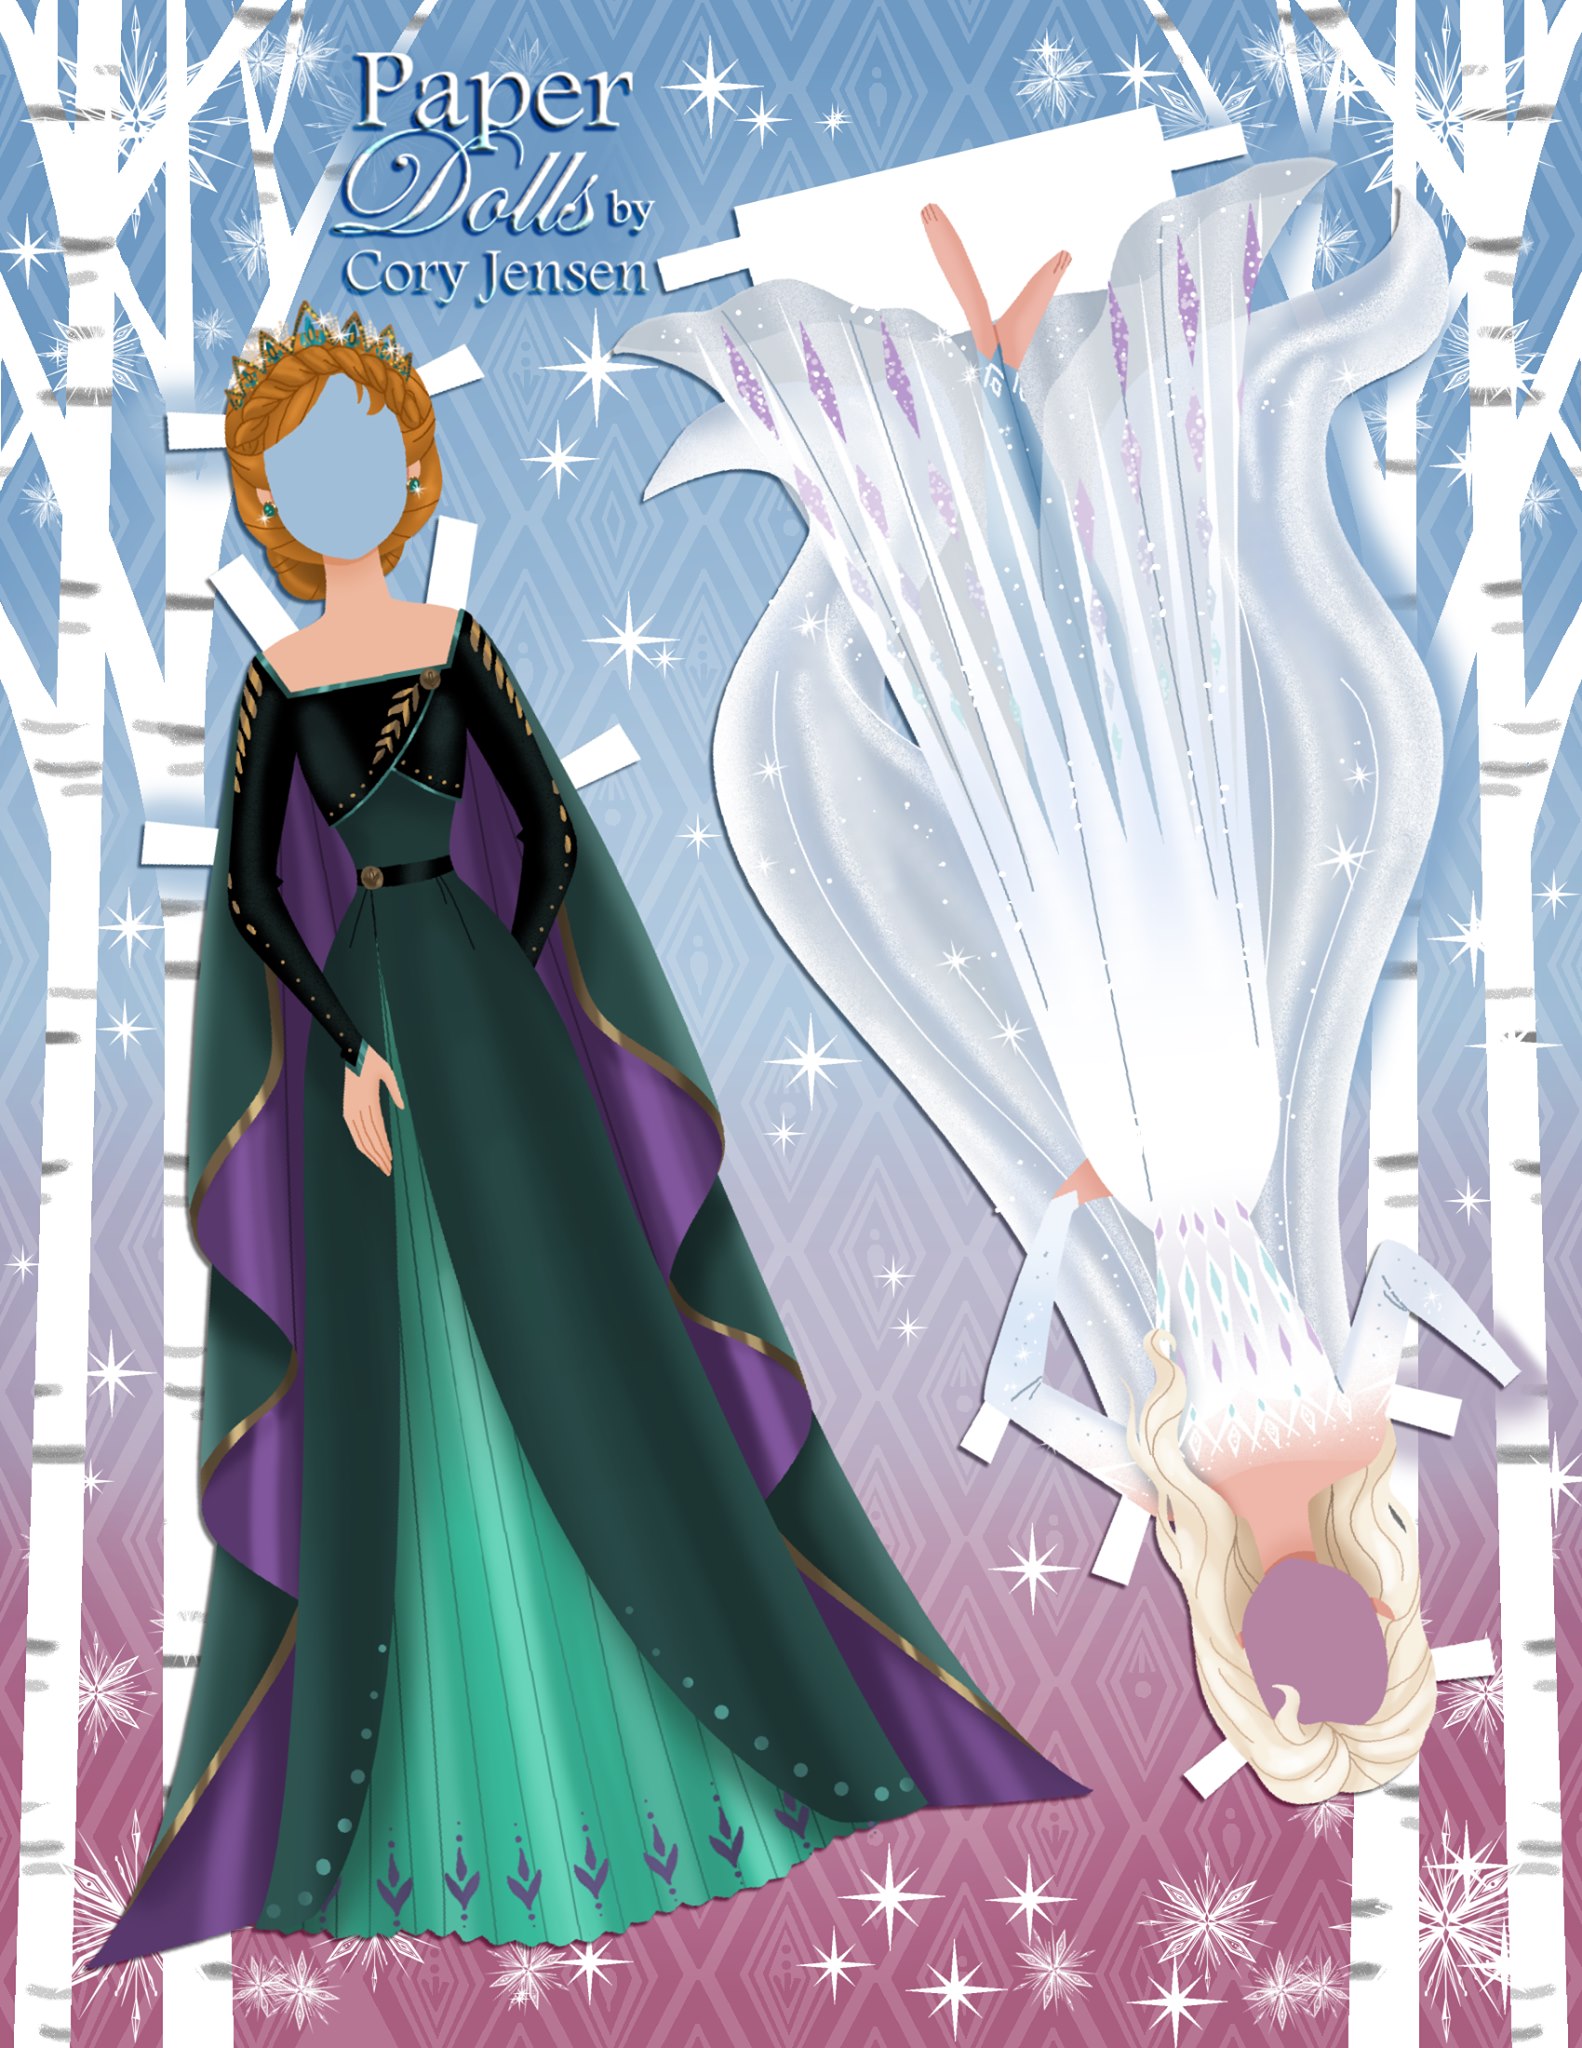 Frozen 2 Elsa And Anna Paper Dolls With Clothing And Dresses